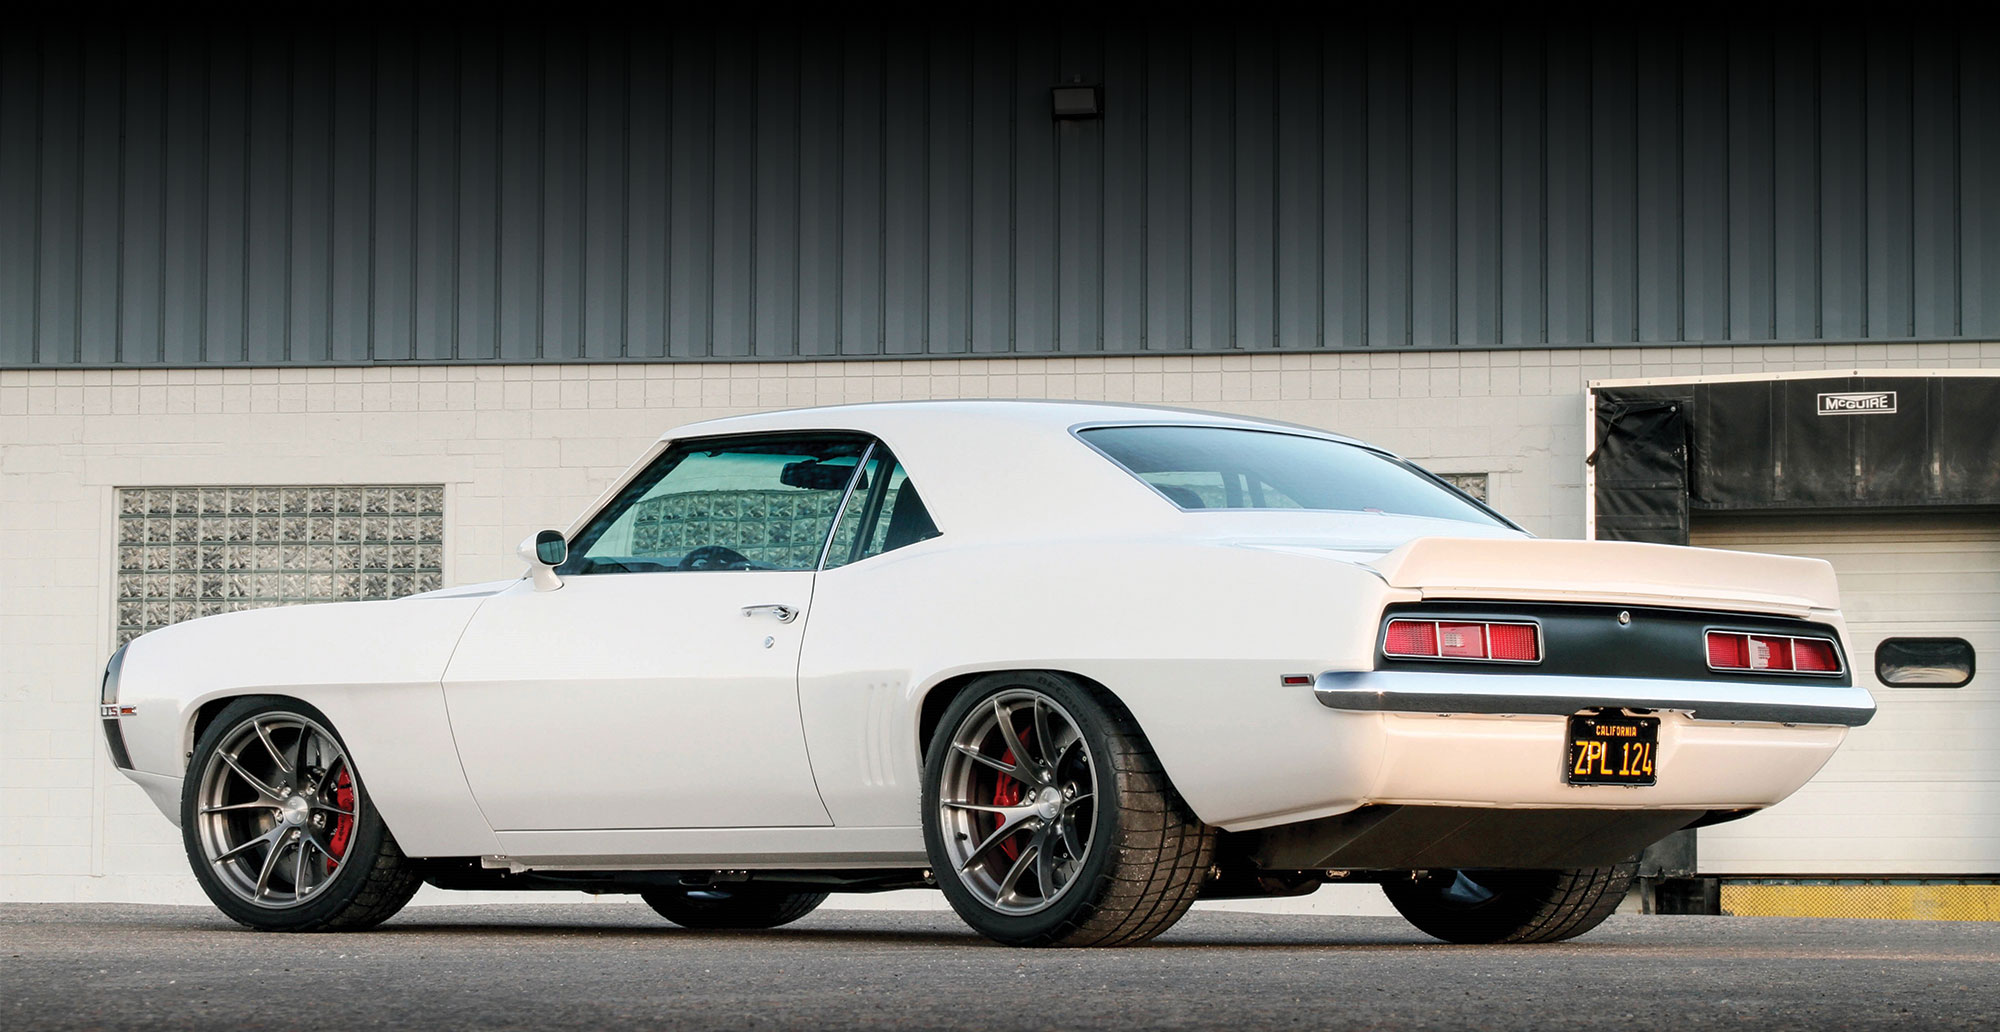 1969 Camaro side profile with building in background